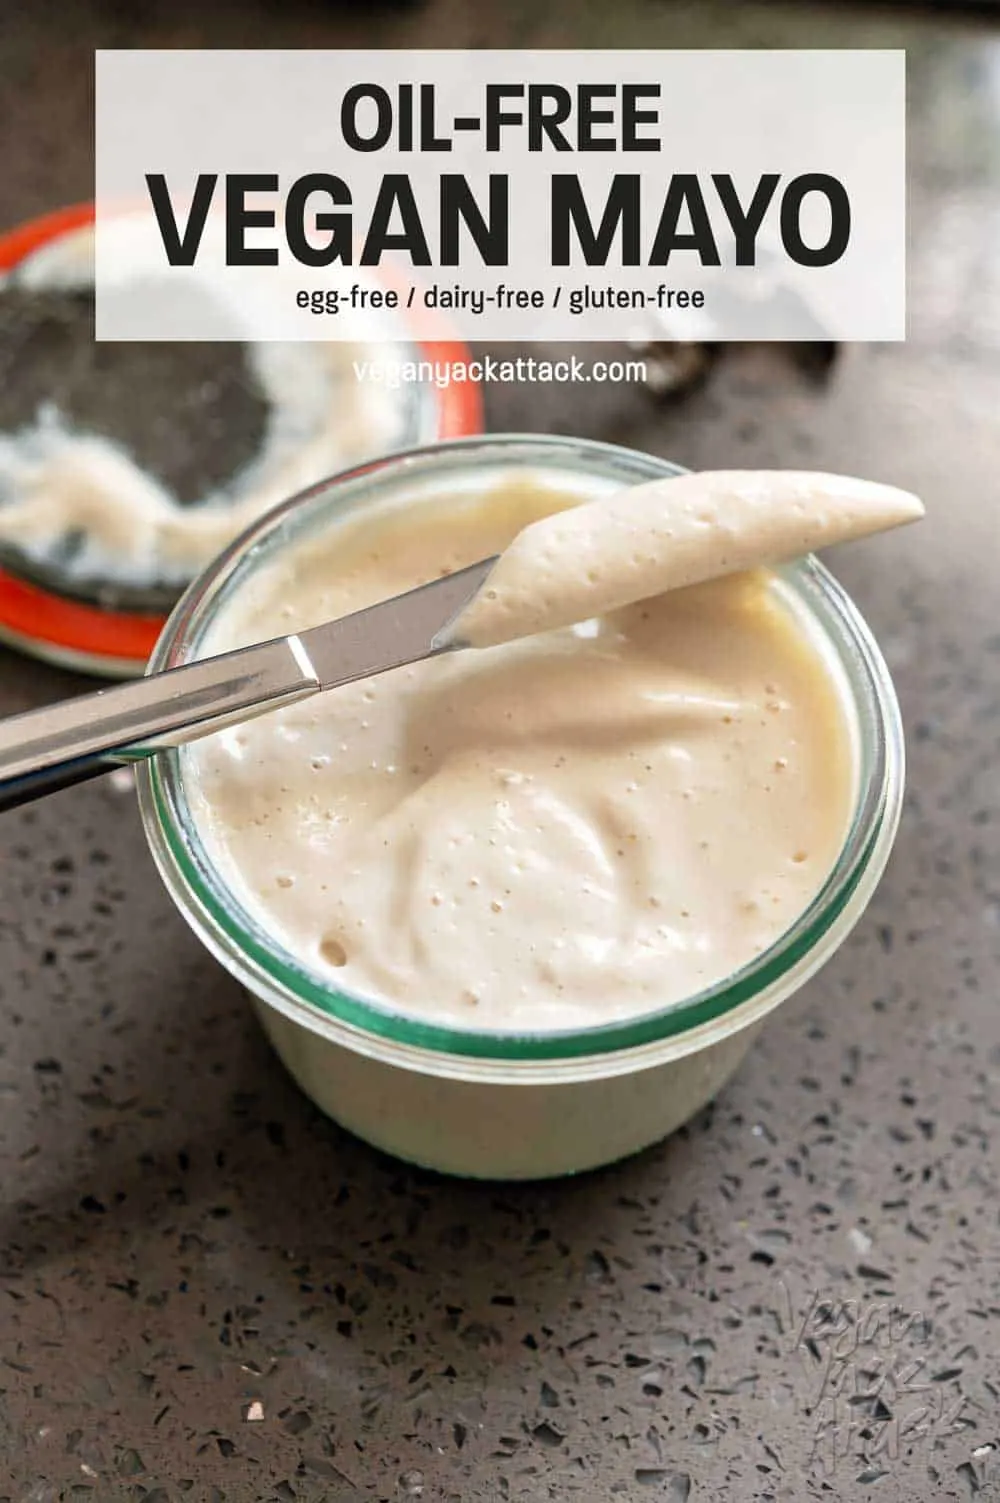 Small jar of vegan mayo with butter knife on a grey quartz counter